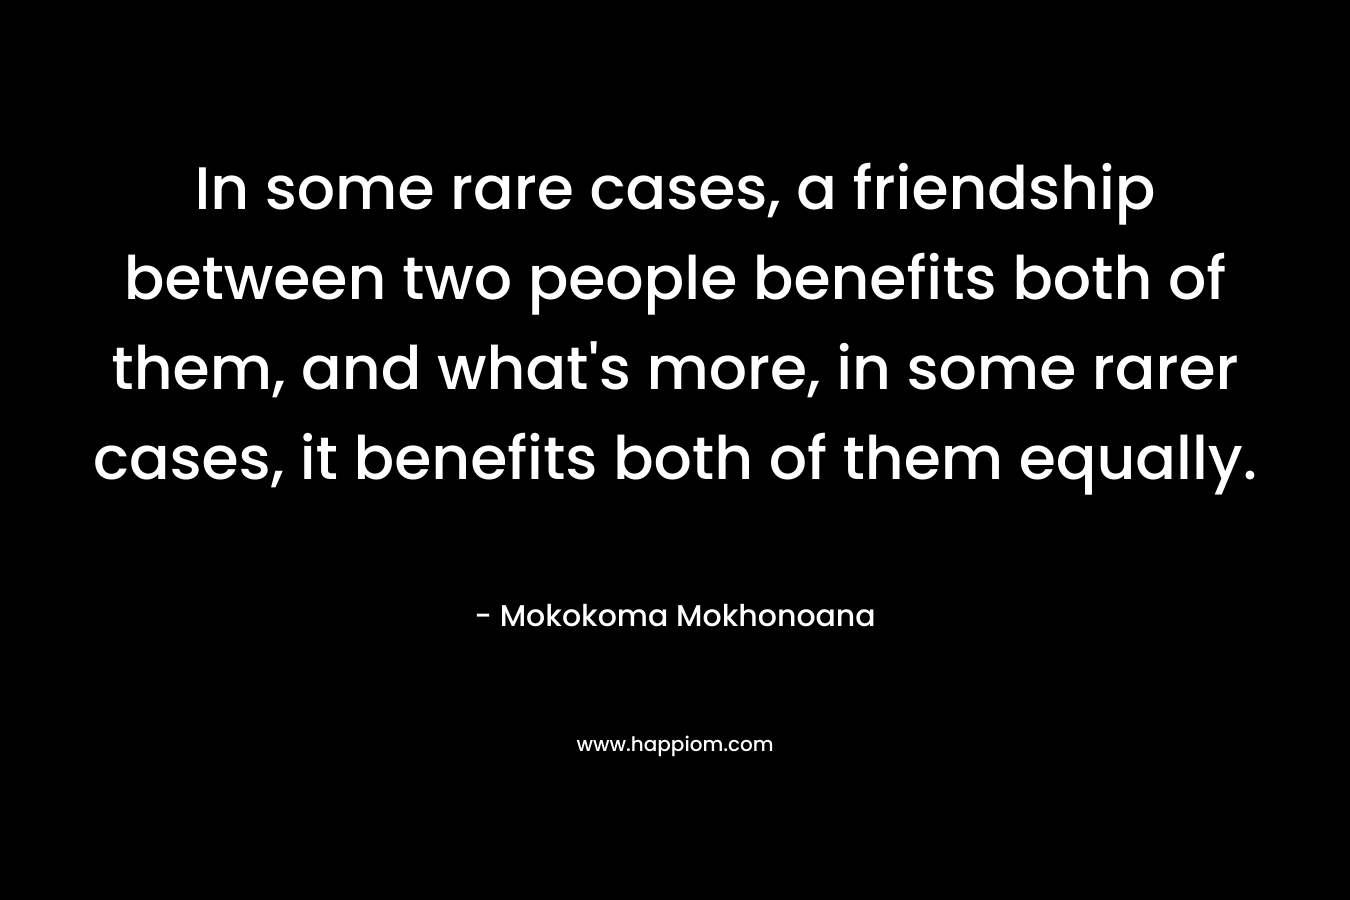 In some rare cases, a friendship between two people benefits both of them, and what's more, in some rarer cases, it benefits both of them equally.